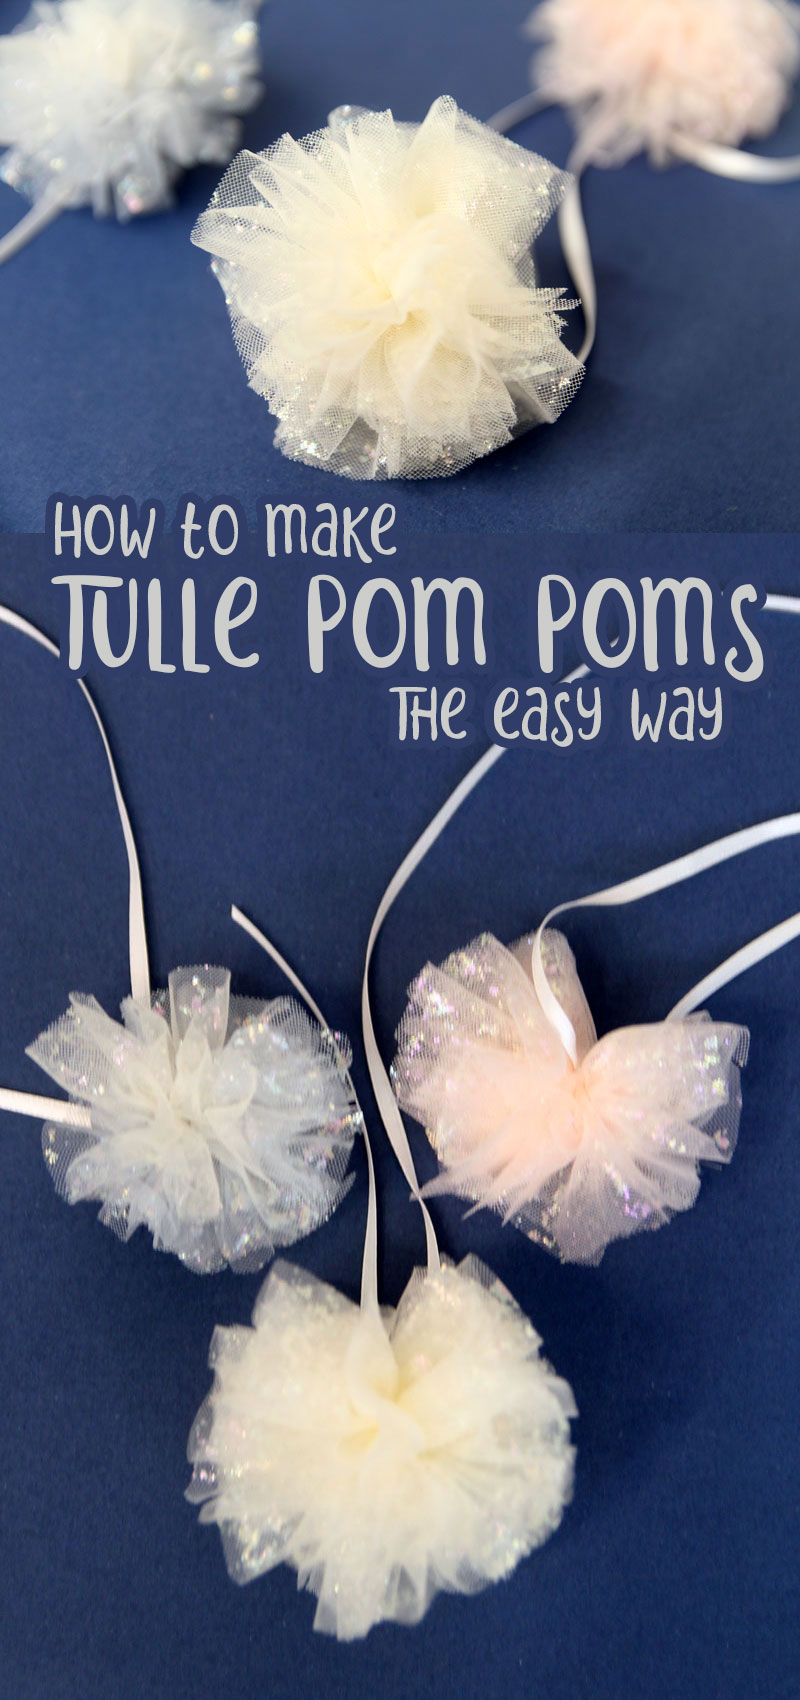 how to make a pom pom with tulle collage on a navy background.